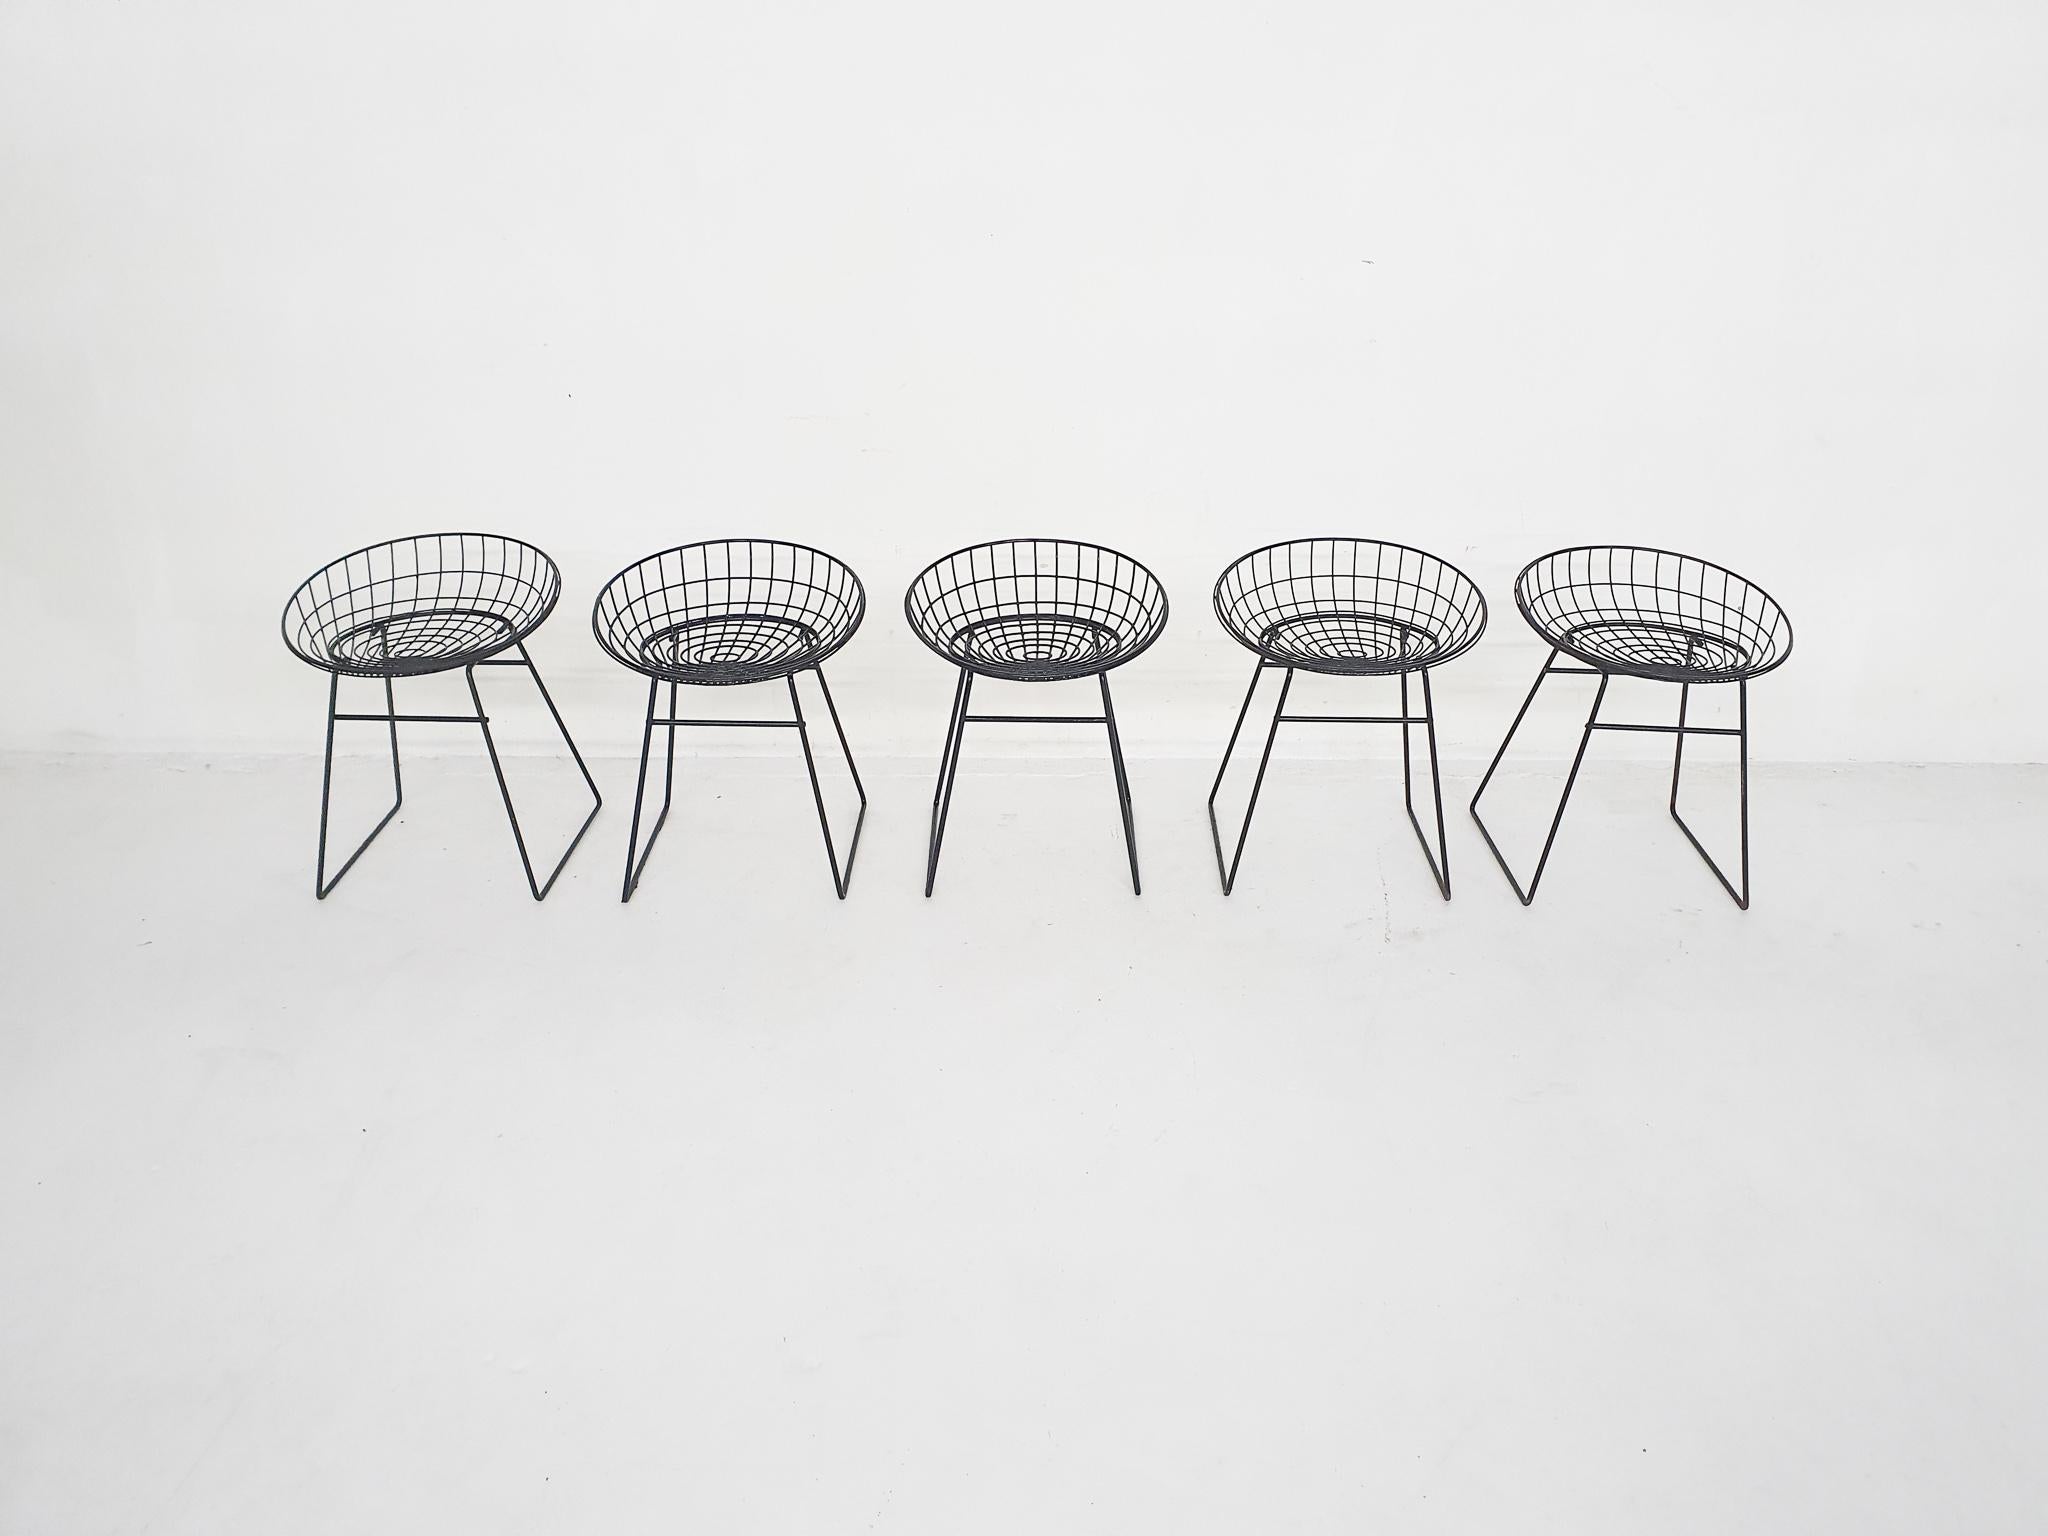 Black metal wire stools designed by Adriaan Dekker and Cees Braakman in 1958 for Pastoe.
Some of the frames were a bit rusted, and have been repainted in black.

Cees Braakman was a Dutch furniture designer who worked for UMS Pastoe in the